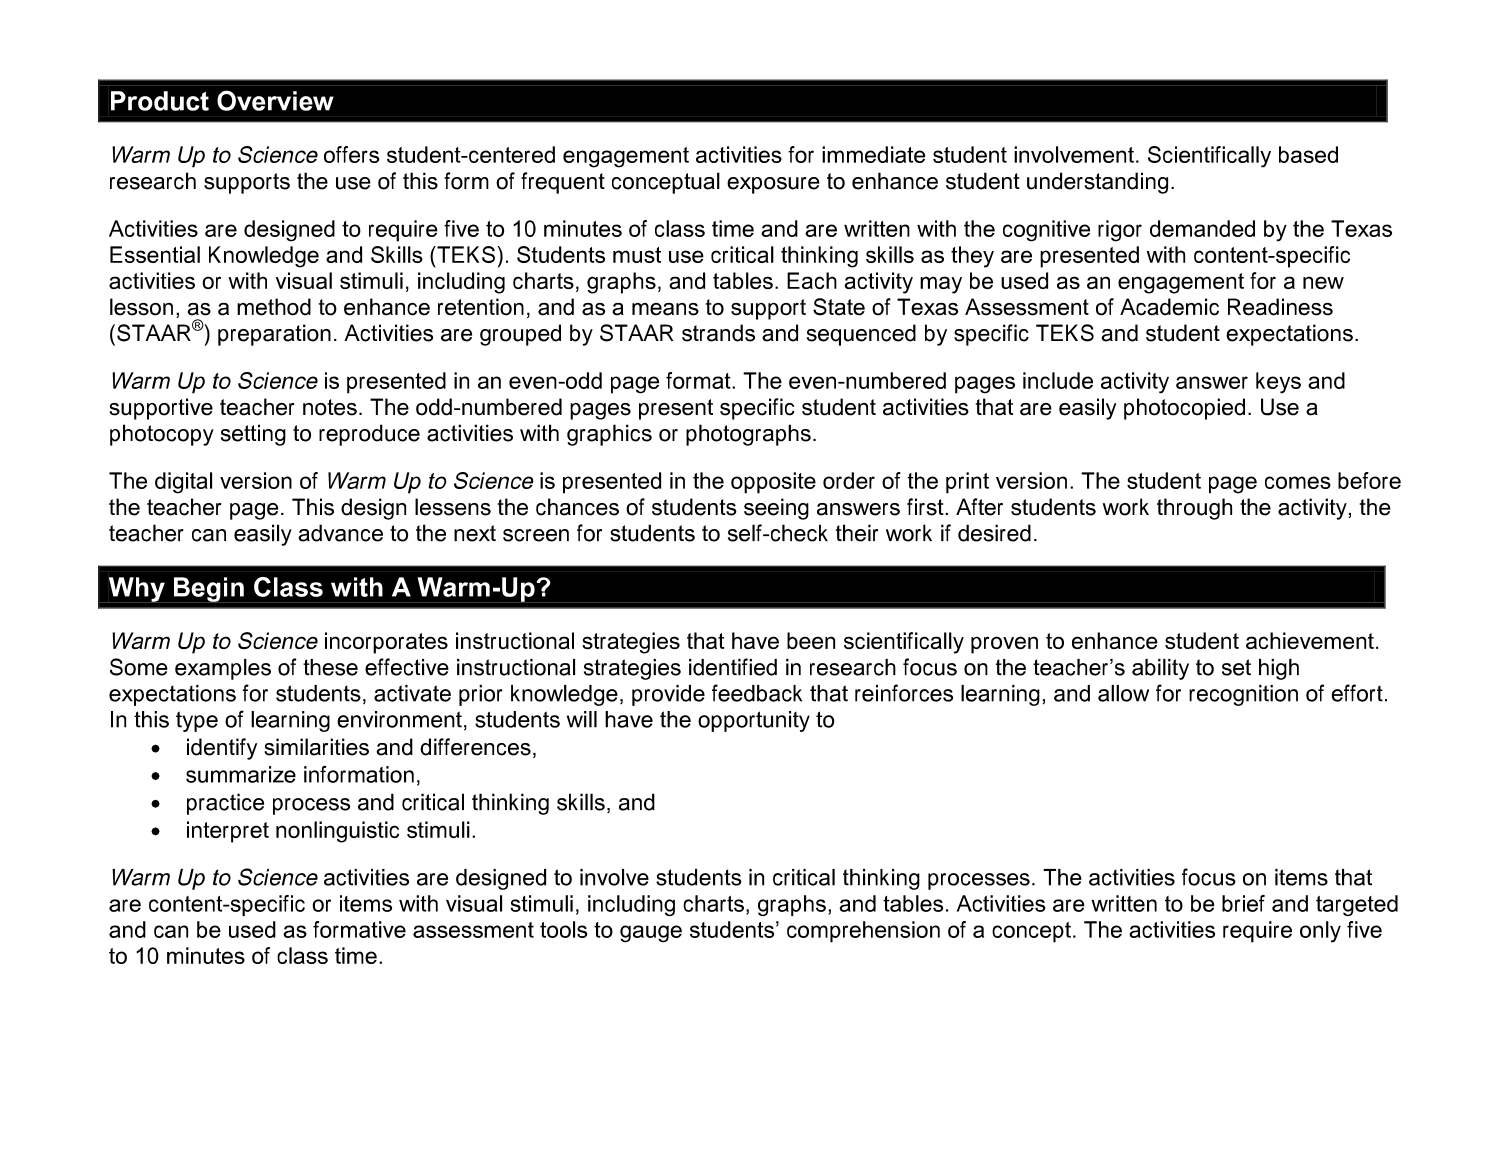 Warm Up to Science: TEKS-Based Engagement Activities for Grade 5 page 9